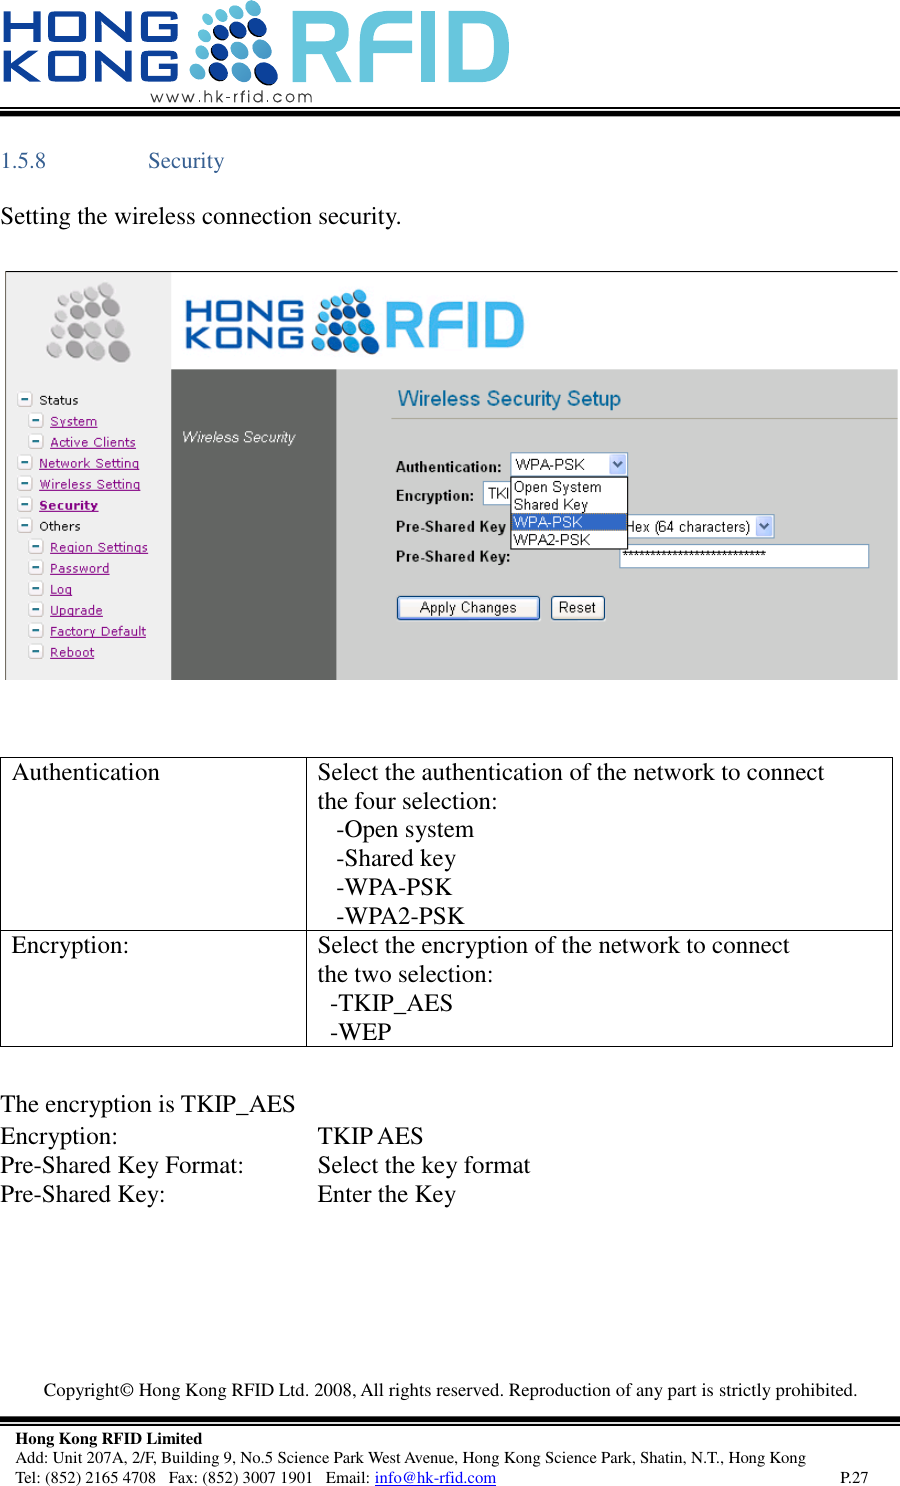   Copyright©  Hong Kong RFID Ltd. 2008, All rights reserved. Reproduction of any part is strictly prohibited.   Hong Kong RFID Limited Add: Unit 207A, 2/F, Building 9, No.5 Science Park West Avenue, Hong Kong Science Park, Shatin, N.T., Hong Kong Tel: (852) 2165 4708   Fax: (852) 3007 1901   Email: info@hk-rfid.com     P.27 1.5.8 Security Setting the wireless connection security.    Authentication  Select the authentication of the network to connect the four selection:    -Open system    -Shared key    -WPA-PSK    -WPA2-PSK Encryption: Select the encryption of the network to connect the two selection:   -TKIP_AES   -WEP  The encryption is TKIP_AES  Encryption: TKIP AES Pre-Shared Key Format: Select the key format Pre-Shared Key: Enter the Key 